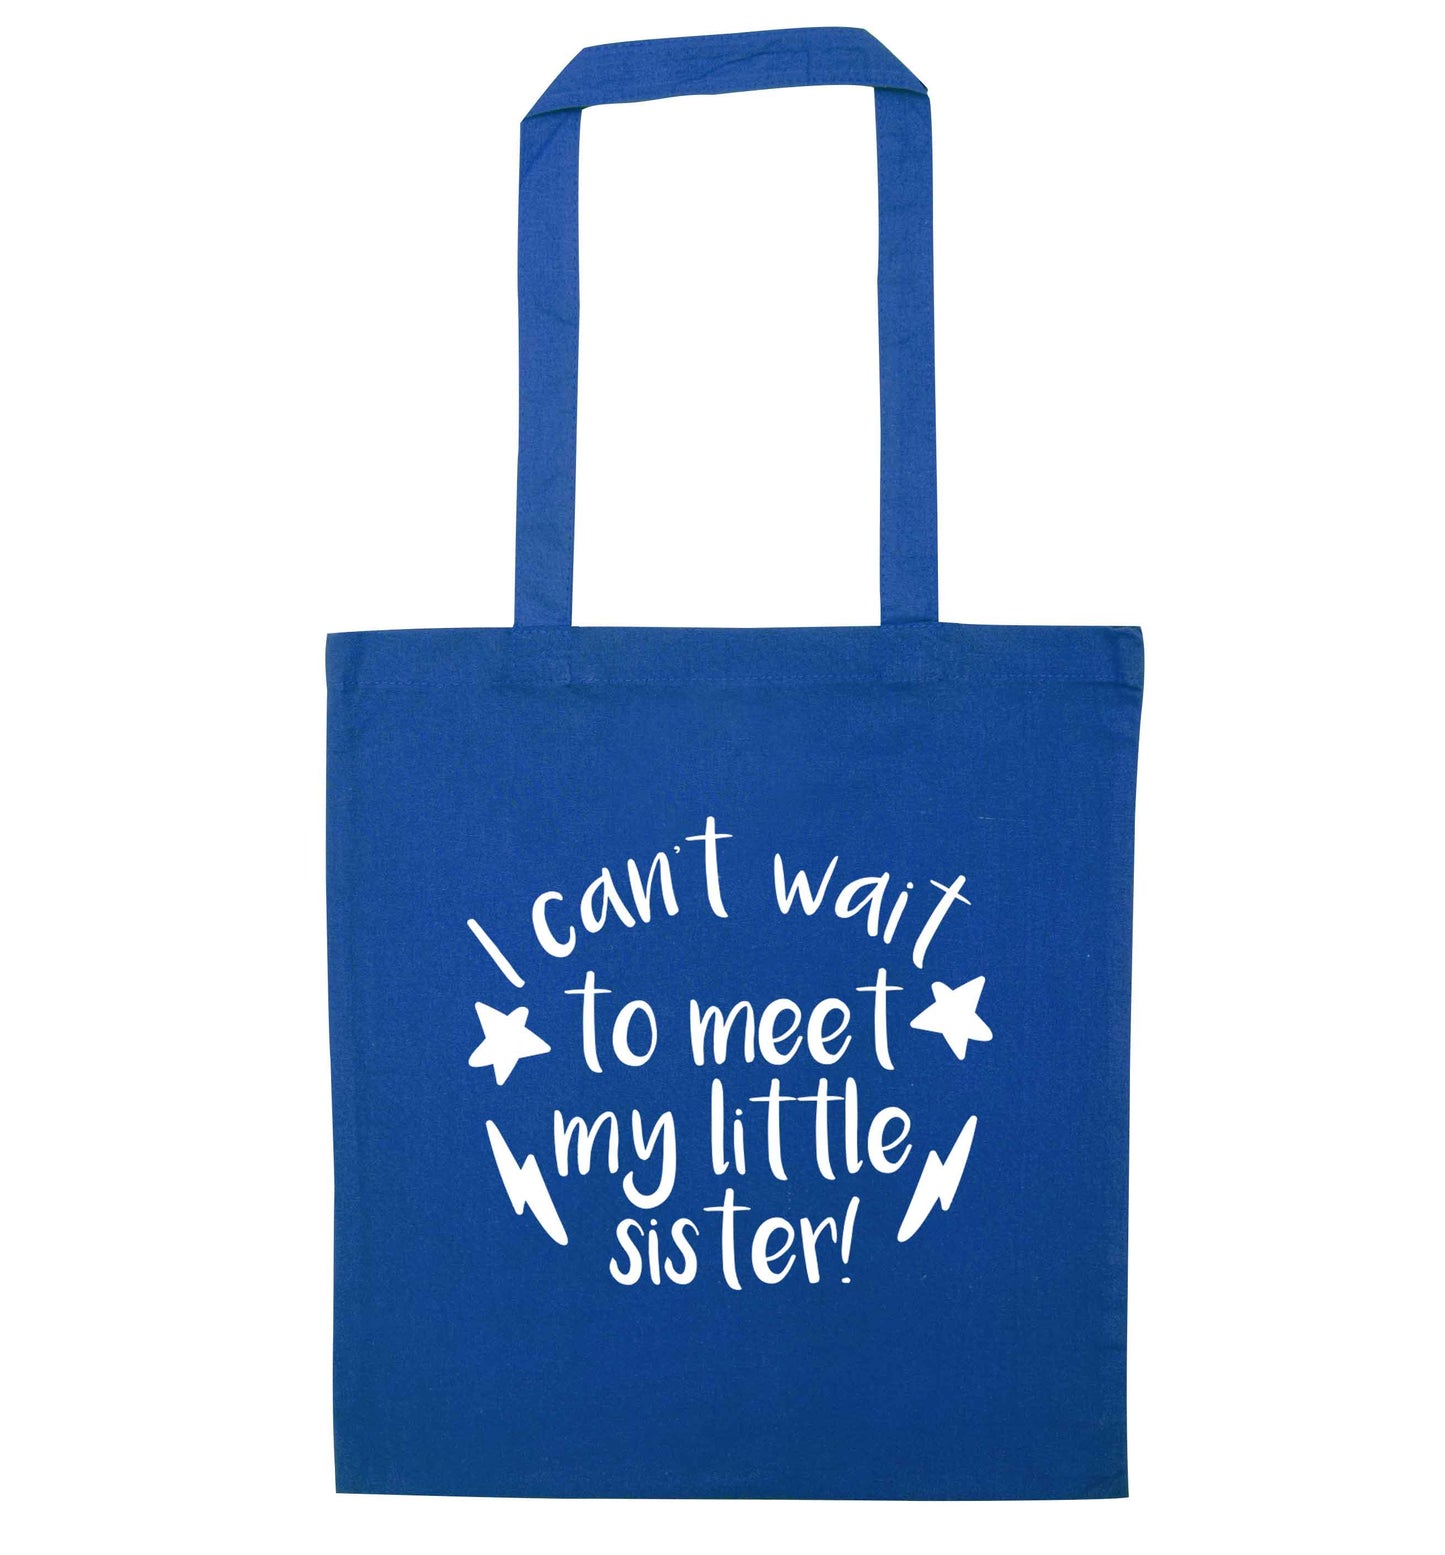 Something special growing inside it's my little sister I can't wait to say hi! blue tote bag